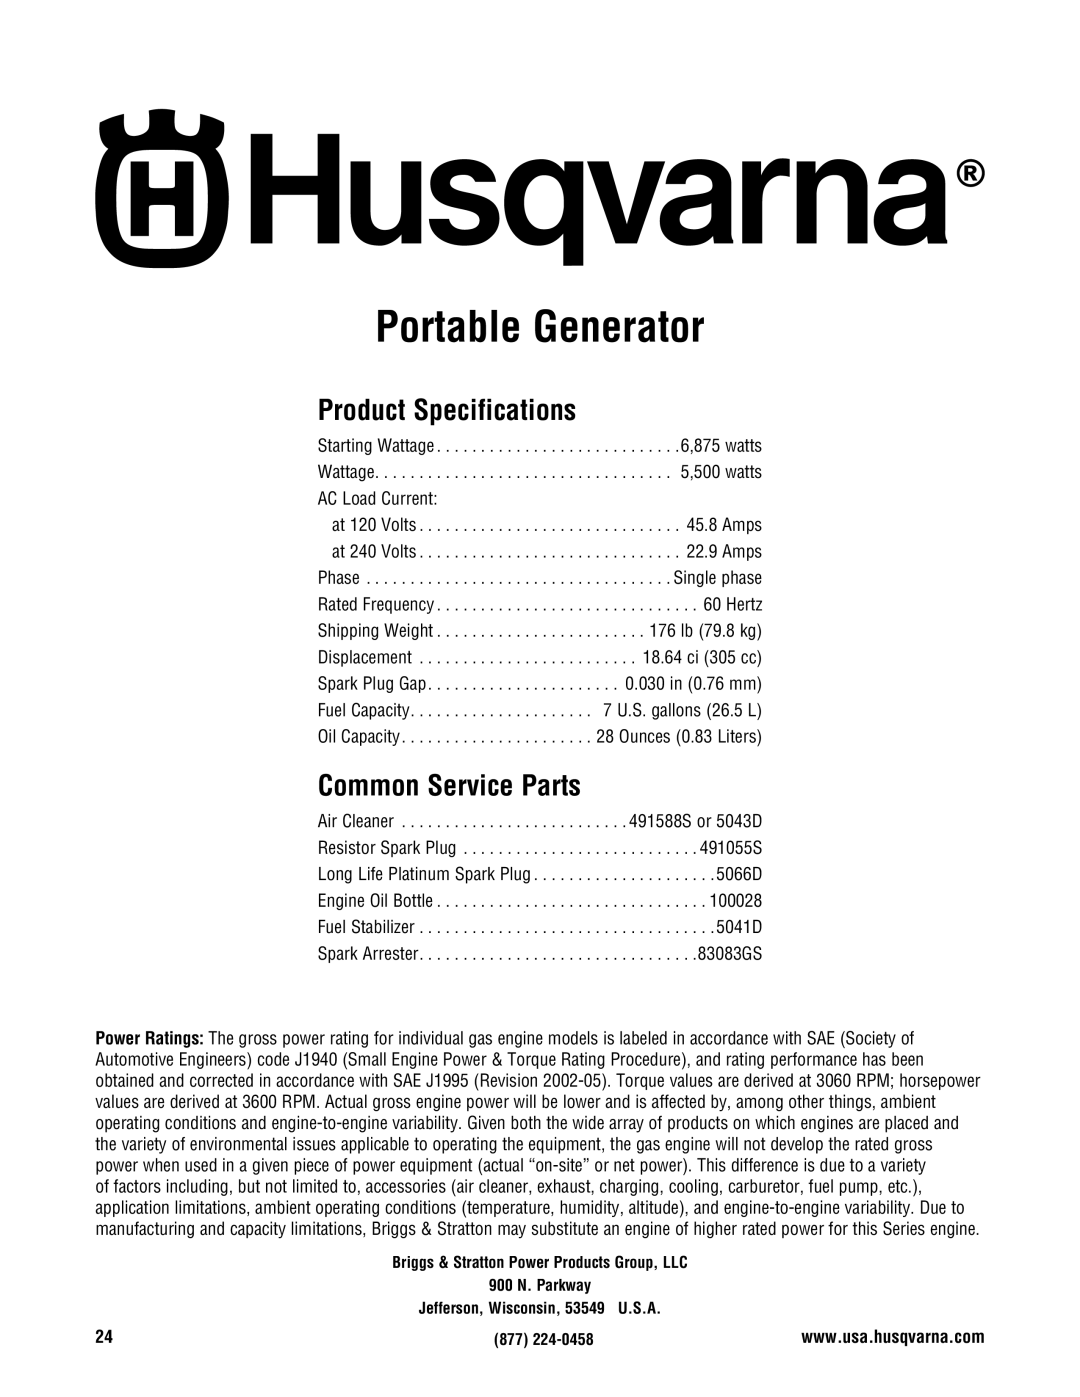 Husqvarna 1055 GN manual Portable Generator, Product Specifications, Common Service Parts 